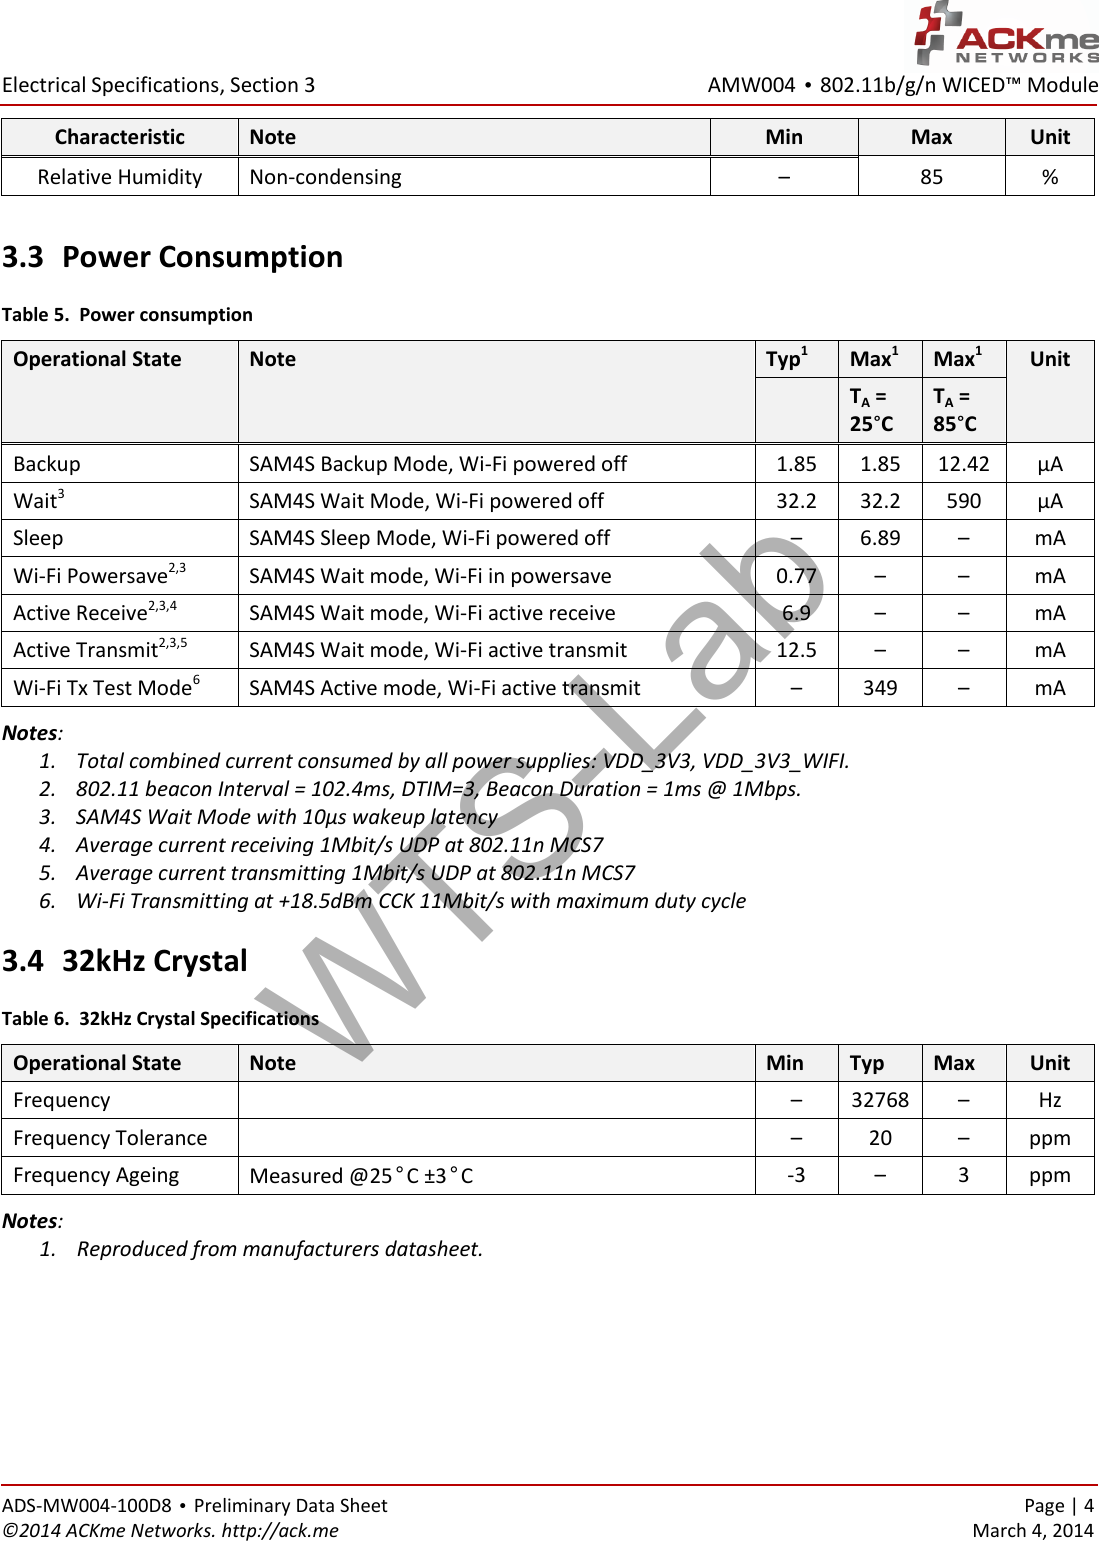 AMW004 • 802.11b/g/n WICED™ Module  Electrical Specifications, Section 3 ADS-MW004-100D8 • Preliminary Data Sheet    Page | 4 ©2014 ACKme Networks. http://ack.me    March 4, 2014 Characteristic Note Min Max Unit Relative Humidity Non-condensing – 85 %  3.3 Power Consumption Table 5.  Power consumption Operational State Note Typ1 Max1 Max1 Unit  TA = 25°C TA = 85°C Backup SAM4S Backup Mode, Wi-Fi powered off 1.85 1.85 12.42 µA Wait3 SAM4S Wait Mode, Wi-Fi powered off 32.2 32.2 590 µA Sleep SAM4S Sleep Mode, Wi-Fi powered off – 6.89 – mA Wi-Fi Powersave2,3 SAM4S Wait mode, Wi-Fi in powersave 0.77 – – mA Active Receive2,3,4 SAM4S Wait mode, Wi-Fi active receive 6.9 – – mA Active Transmit2,3,5 SAM4S Wait mode, Wi-Fi active transmit 12.5 – – mA Wi-Fi Tx Test Mode6 SAM4S Active mode, Wi-Fi active transmit – 349 – mA Notes: 1. Total combined current consumed by all power supplies: VDD_3V3, VDD_3V3_WIFI. 2. 802.11 beacon Interval = 102.4ms, DTIM=3, Beacon Duration = 1ms @ 1Mbps.  3. SAM4S Wait Mode with 10µs wakeup latency 4. Average current receiving 1Mbit/s UDP at 802.11n MCS7 5. Average current transmitting 1Mbit/s UDP at 802.11n MCS7 6. Wi-Fi Transmitting at +18.5dBm CCK 11Mbit/s with maximum duty cycle 3.4 32kHz Crystal Table 6.  32kHz Crystal Specifications Operational State Note Min Typ Max Unit Frequency  – 32768 – Hz Frequency Tolerance  – 20 – ppm Frequency Ageing Measured @25°C ±3°C -3 – 3 ppm Notes: 1. Reproduced from manufacturers datasheet.     WTS-Lab